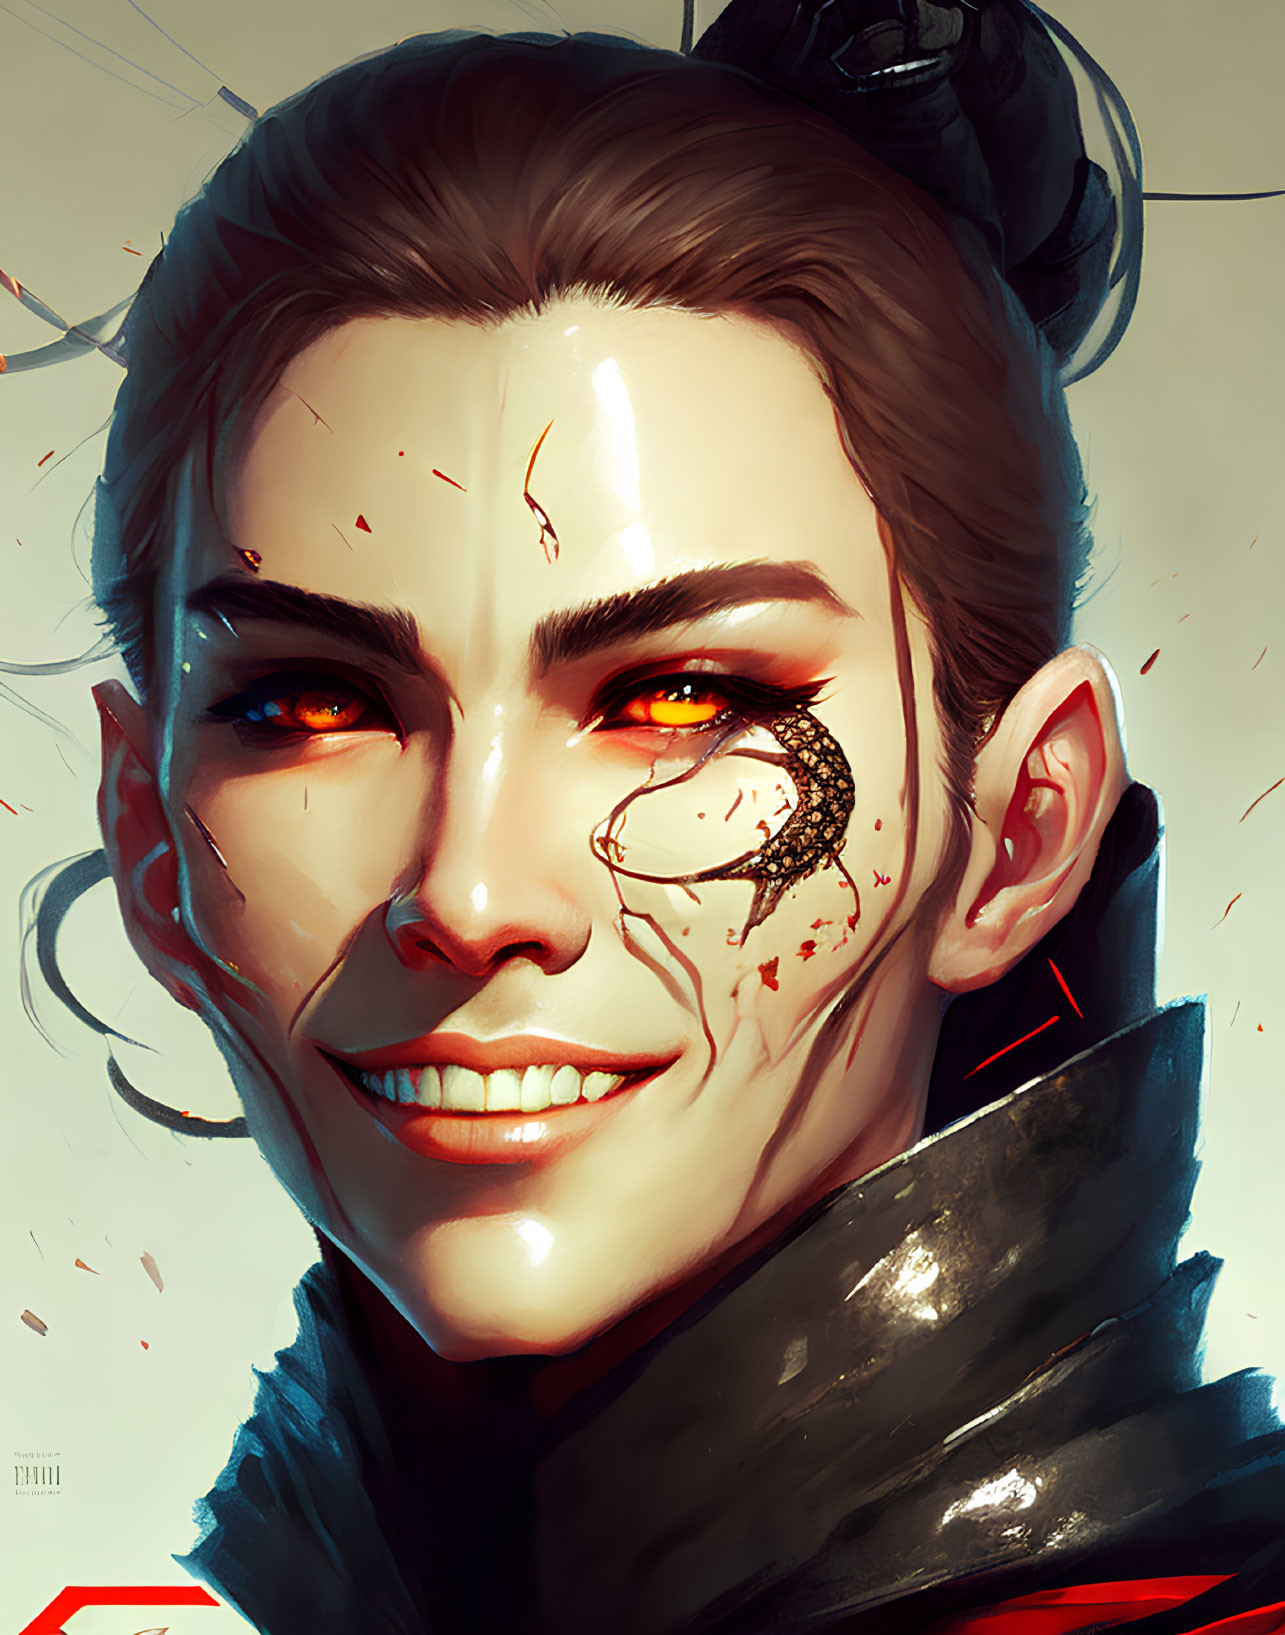 Digital art portrait of person with fiery red eyes, confident smile, and futuristic attire with blood splatter